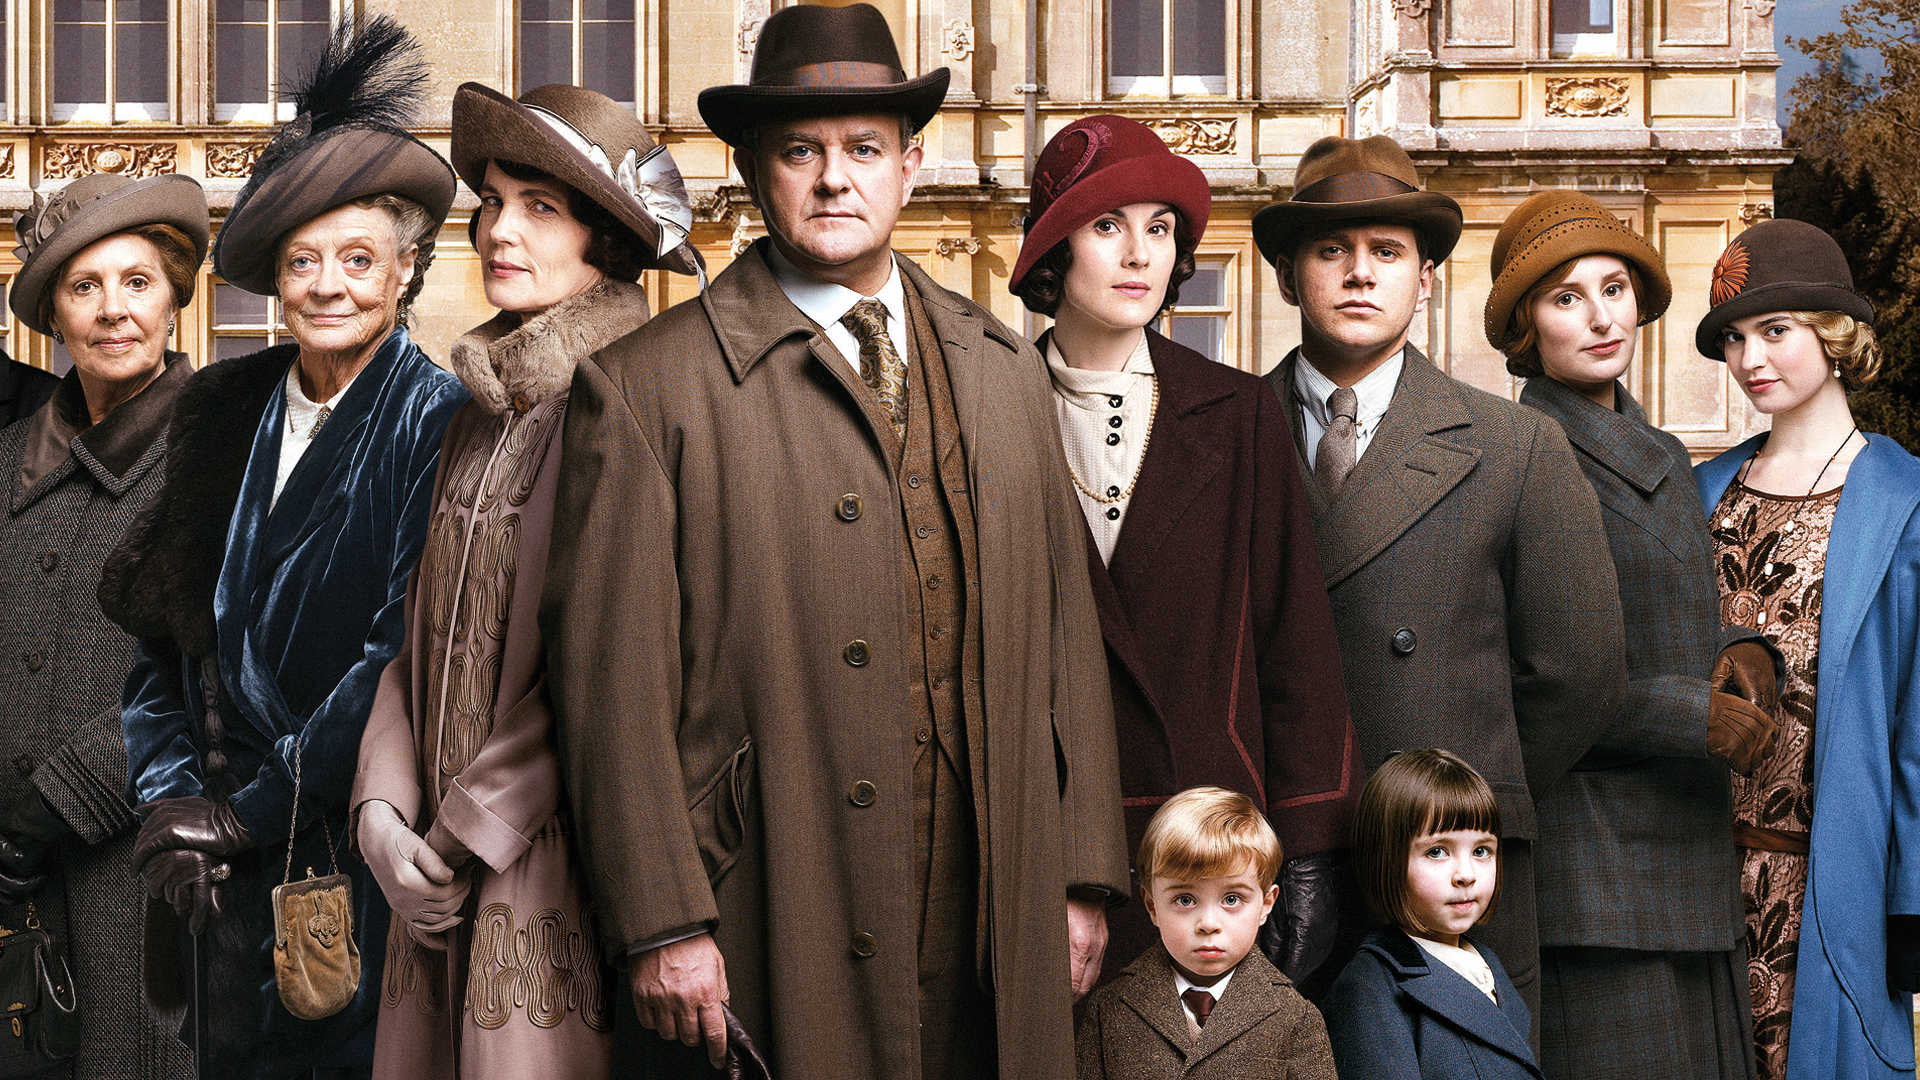 "Downton Abbey" Series 5 cast (Photo: Courtesy of ©Nick Briggs/Carnival Films 2014 for MASTERPIECE)